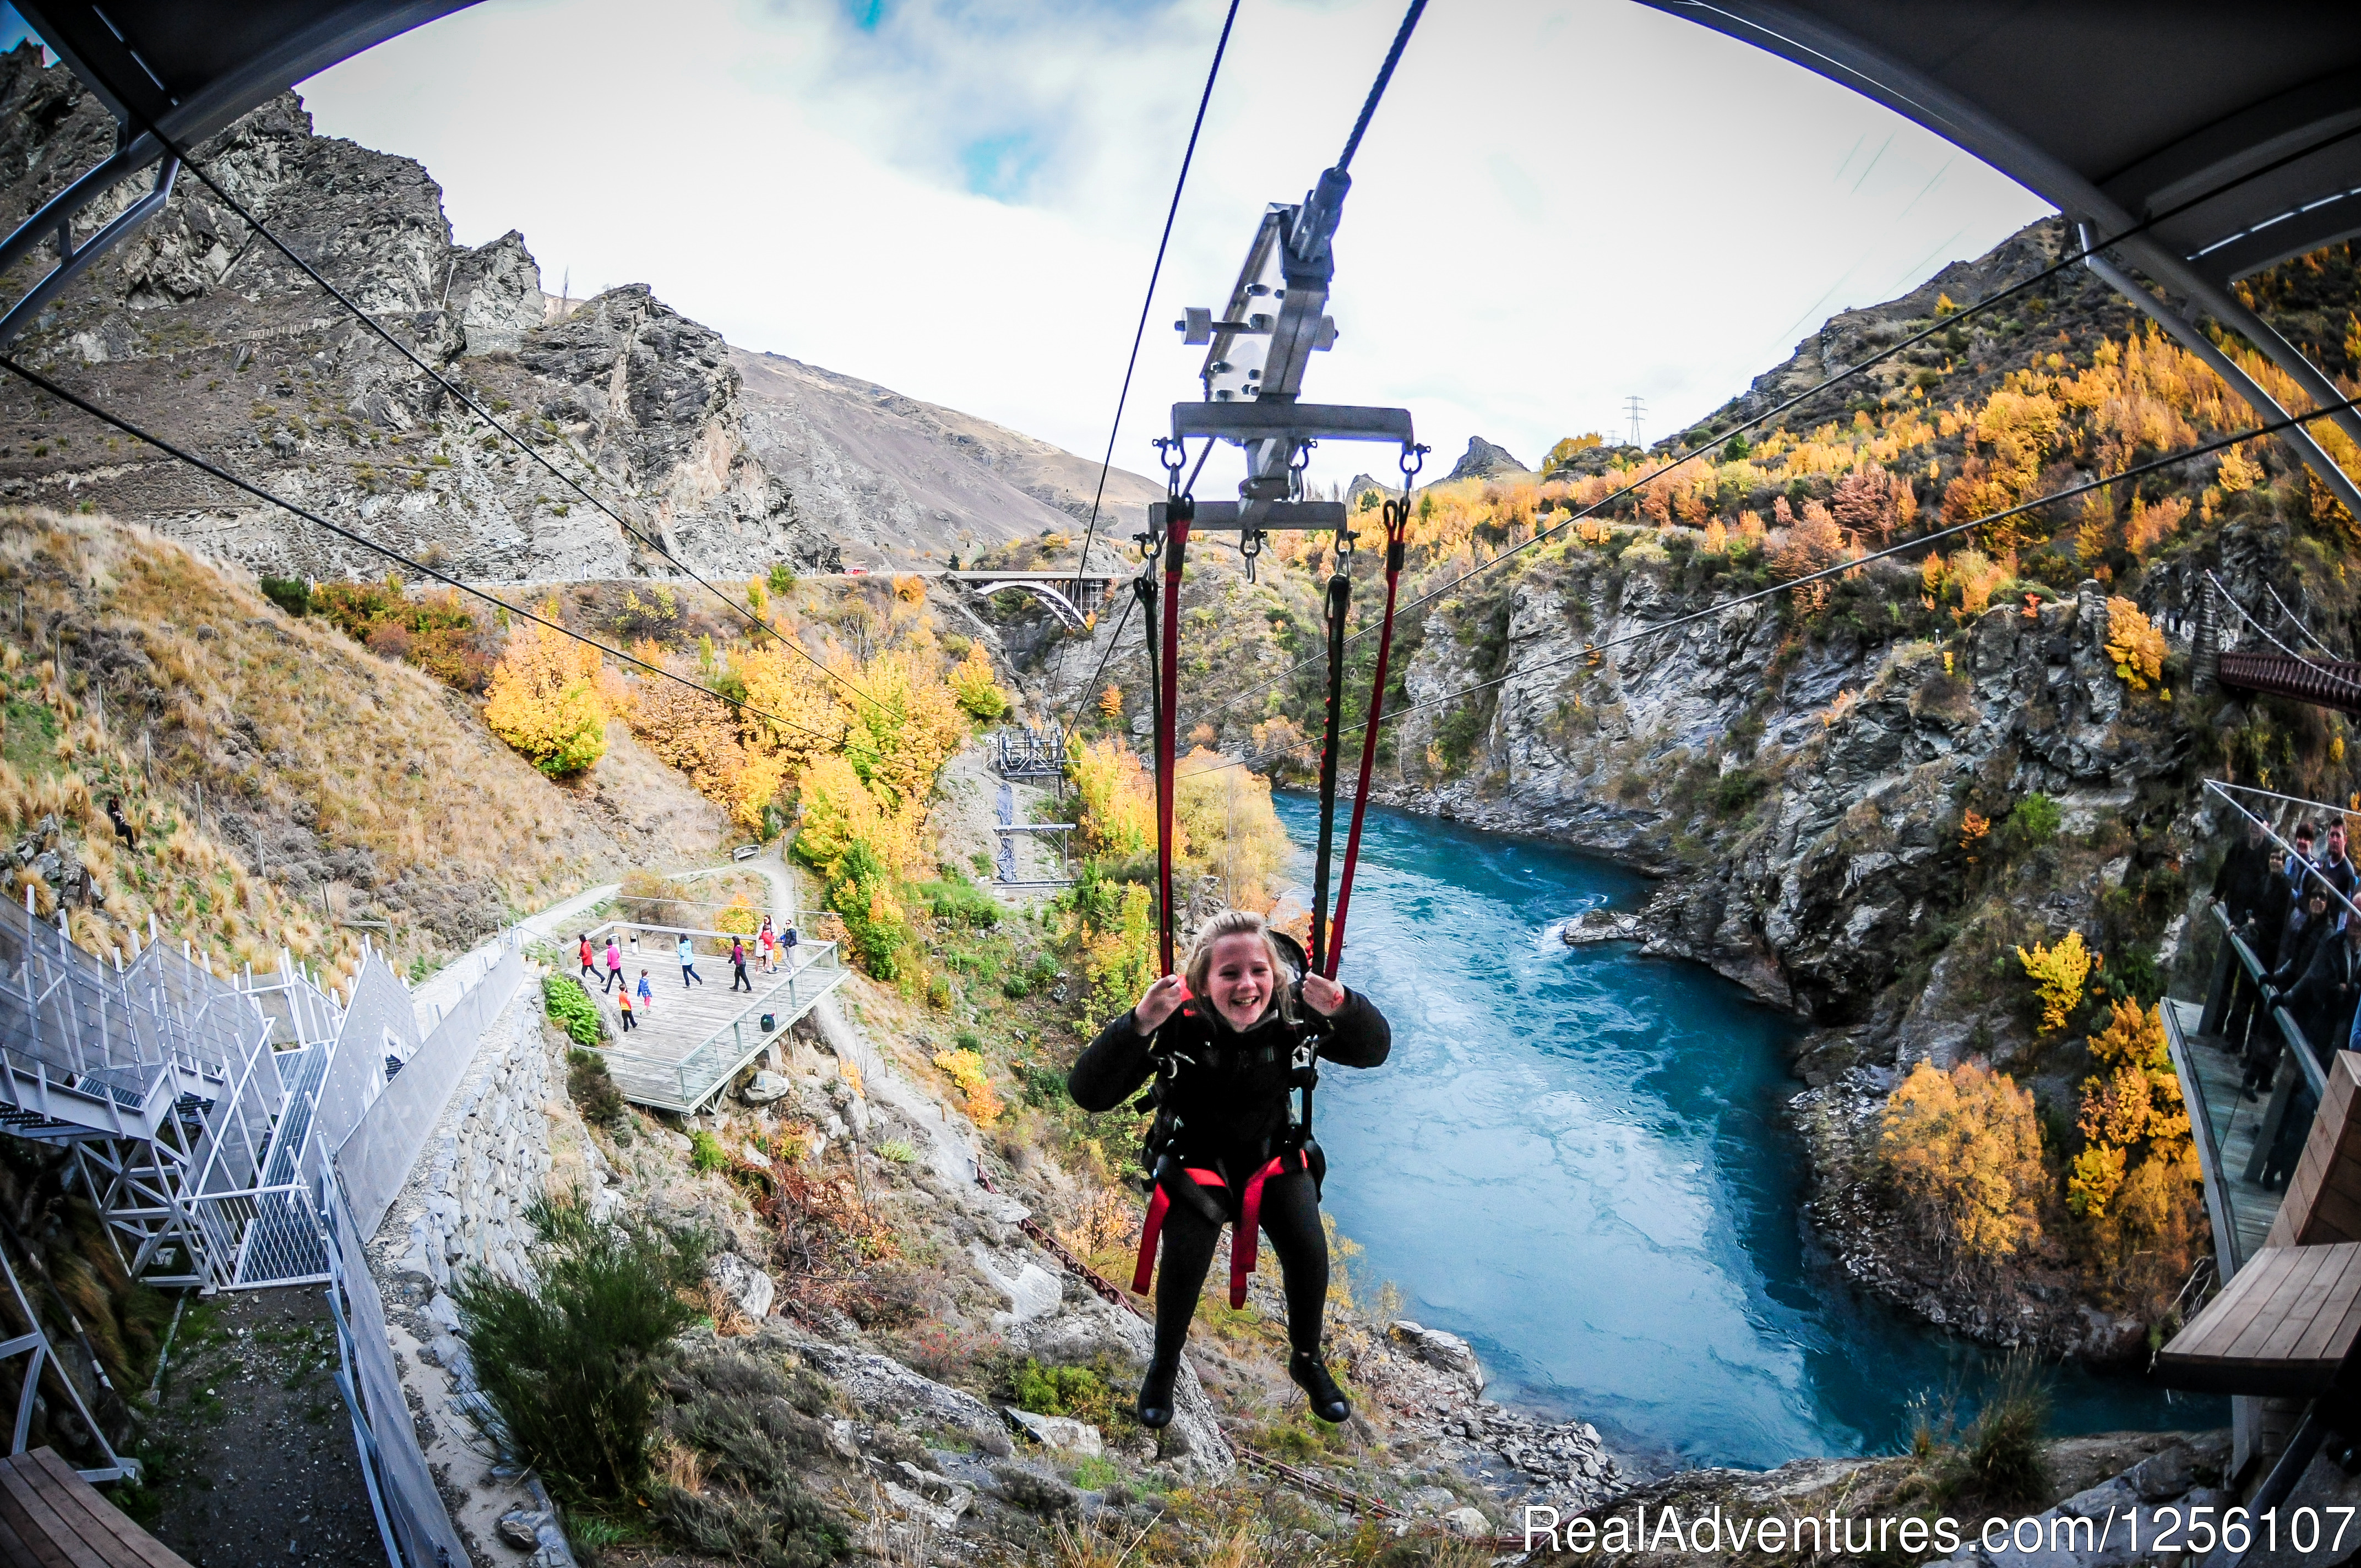 Queenstown, New Zealand & Bungy Jumping - YouTube